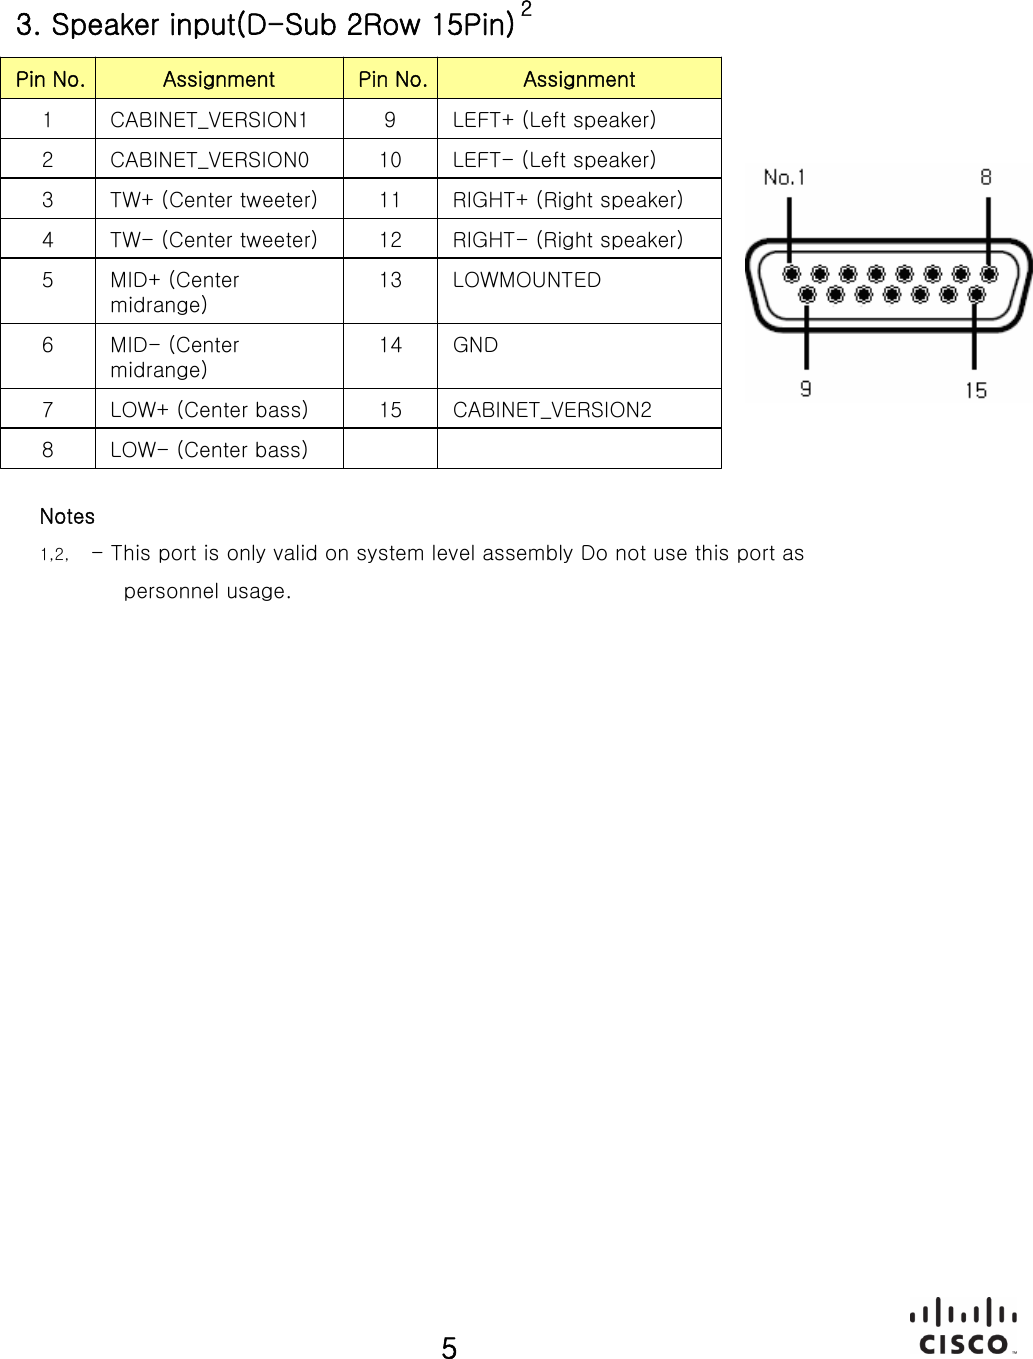 General Specification Pin No. Assignment Pin No. Assignment1 CABINET_VERSION1  9 LEFT+ (Left speaker)2 CABINET_VERSION0  10 LEFT- (Left speaker)3 TW+ (Center tweeter)  11 RIGHT+ (Right speaker)4 TW- (Center tweeter)  12 RIGHT- (Right speaker)5MID+ (Center midrange) 13 LOWMOUNTED6 MID- (Center midrange) 14 GND 7 LOW+ (Center bass)  15 CABINET_VERSION28LOW-(Center bass) 3. Speaker input(D-Sub 2Row 15Pin)5Notes1,2, - This port is only valid on system level assembly Do not use this port as     personnel usage.2